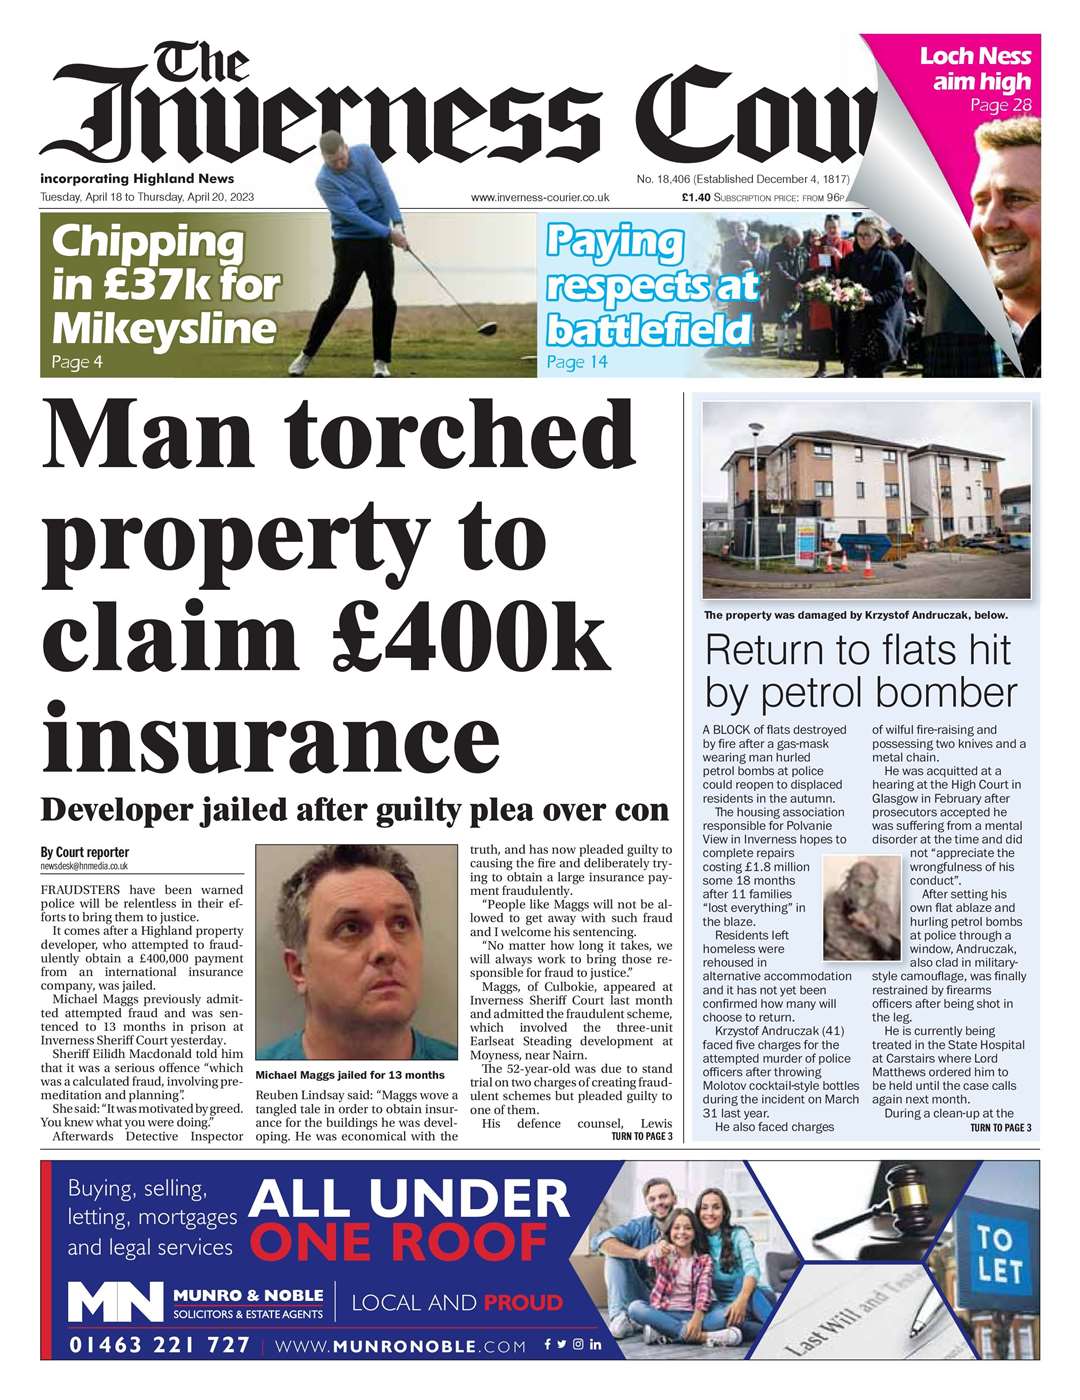 The Inverness Courier, April 18, front page.